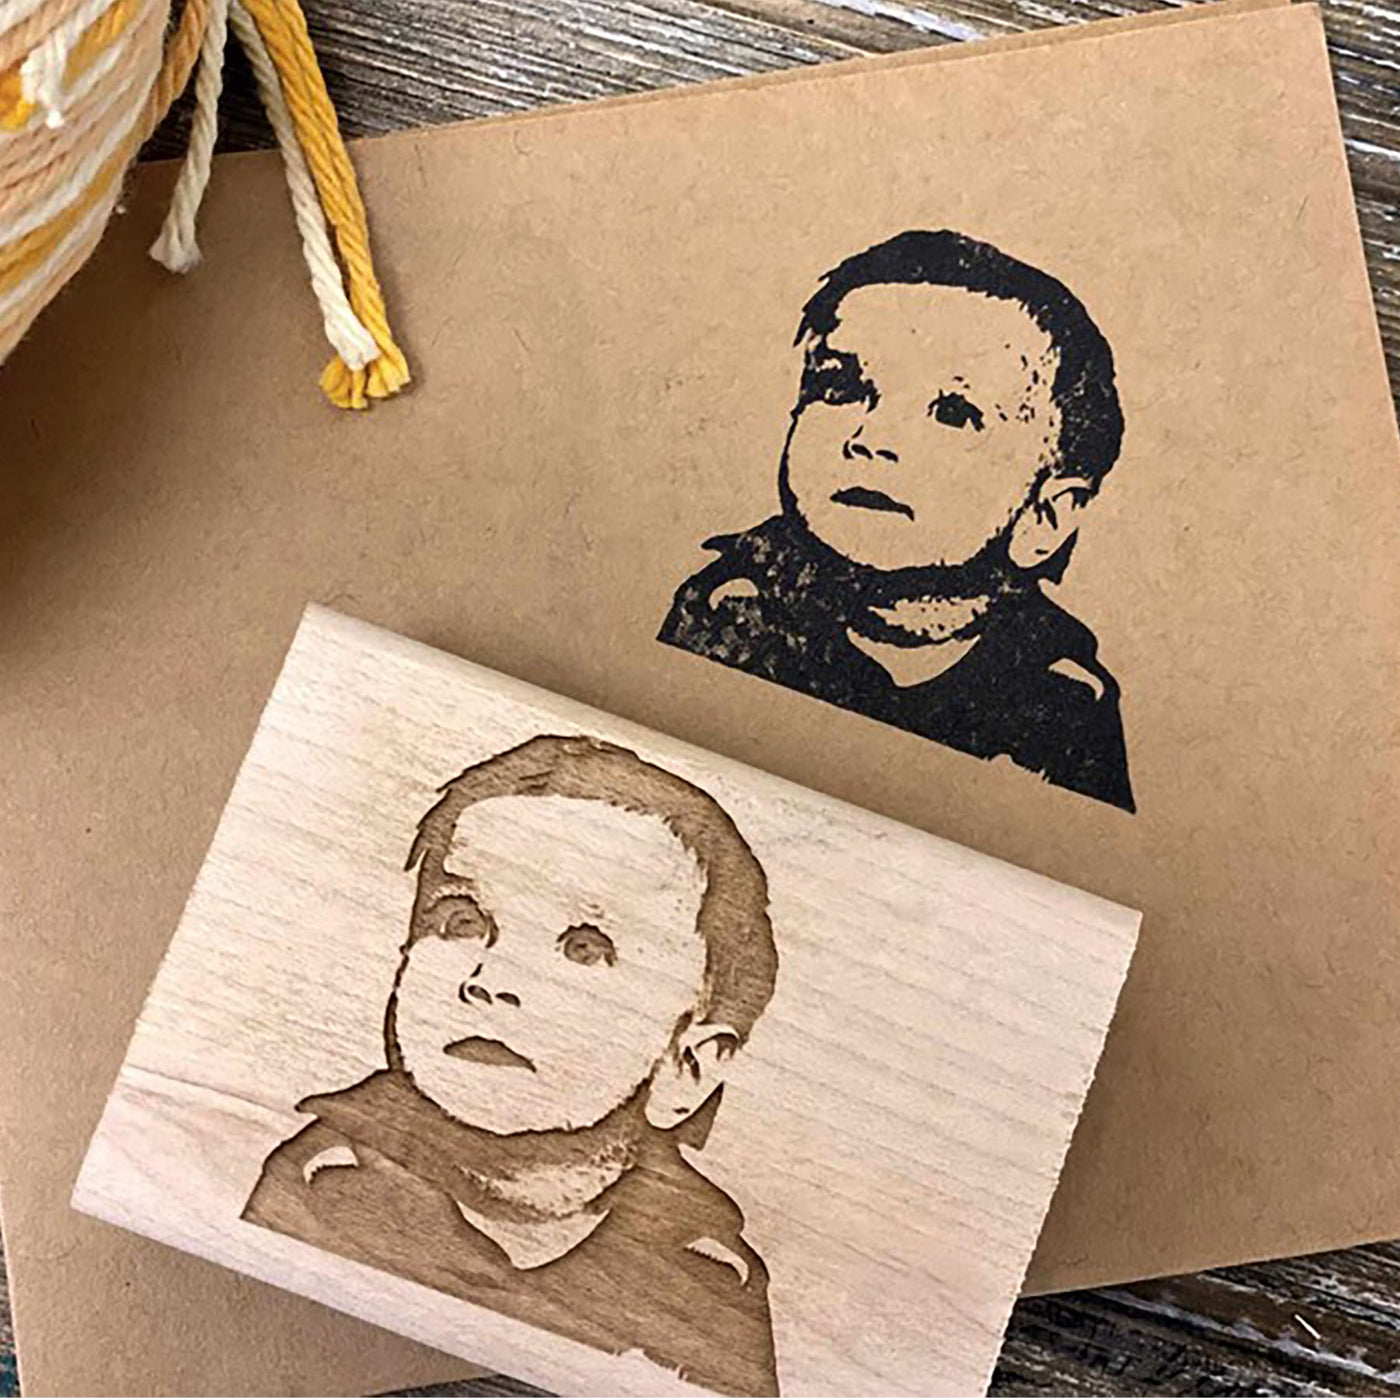 portrait of baby customized into a rubber stamp engraved on wood